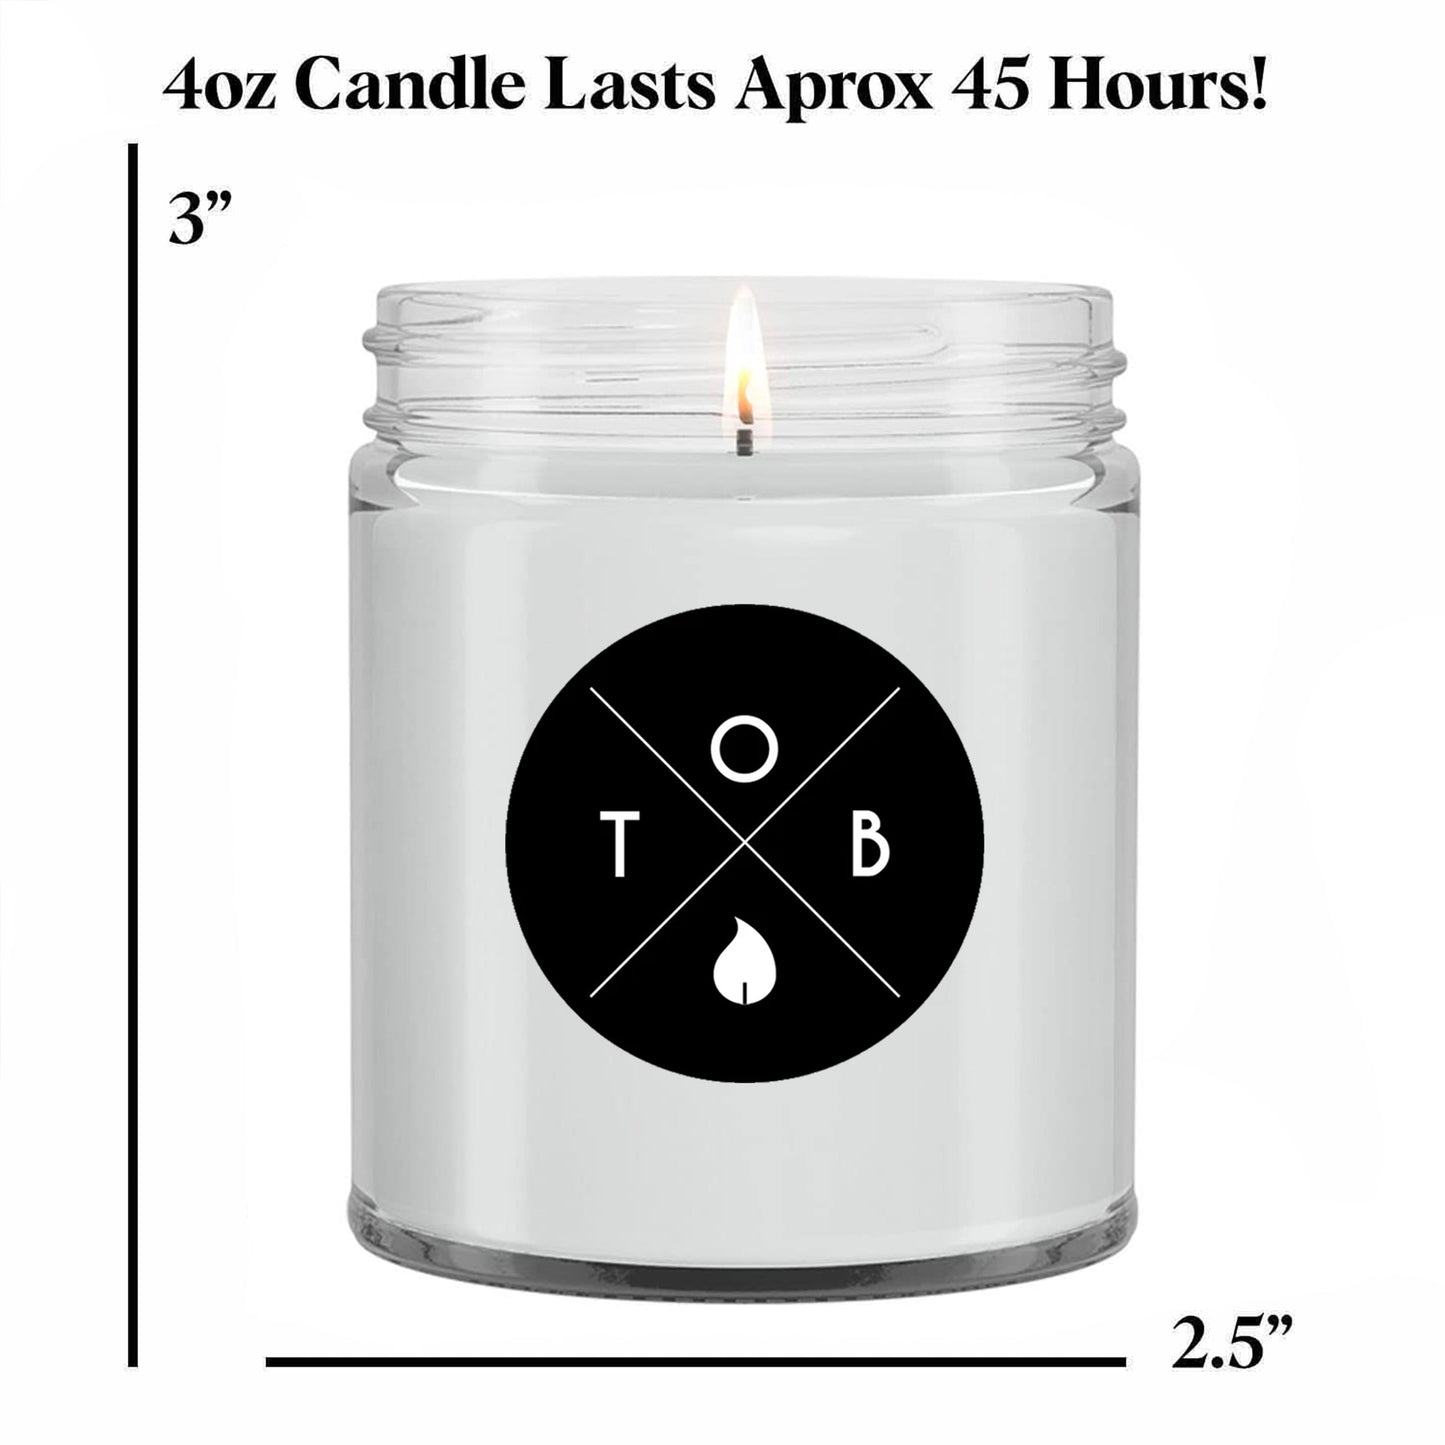 Almond Creme Spruce 4oz Soy Candle